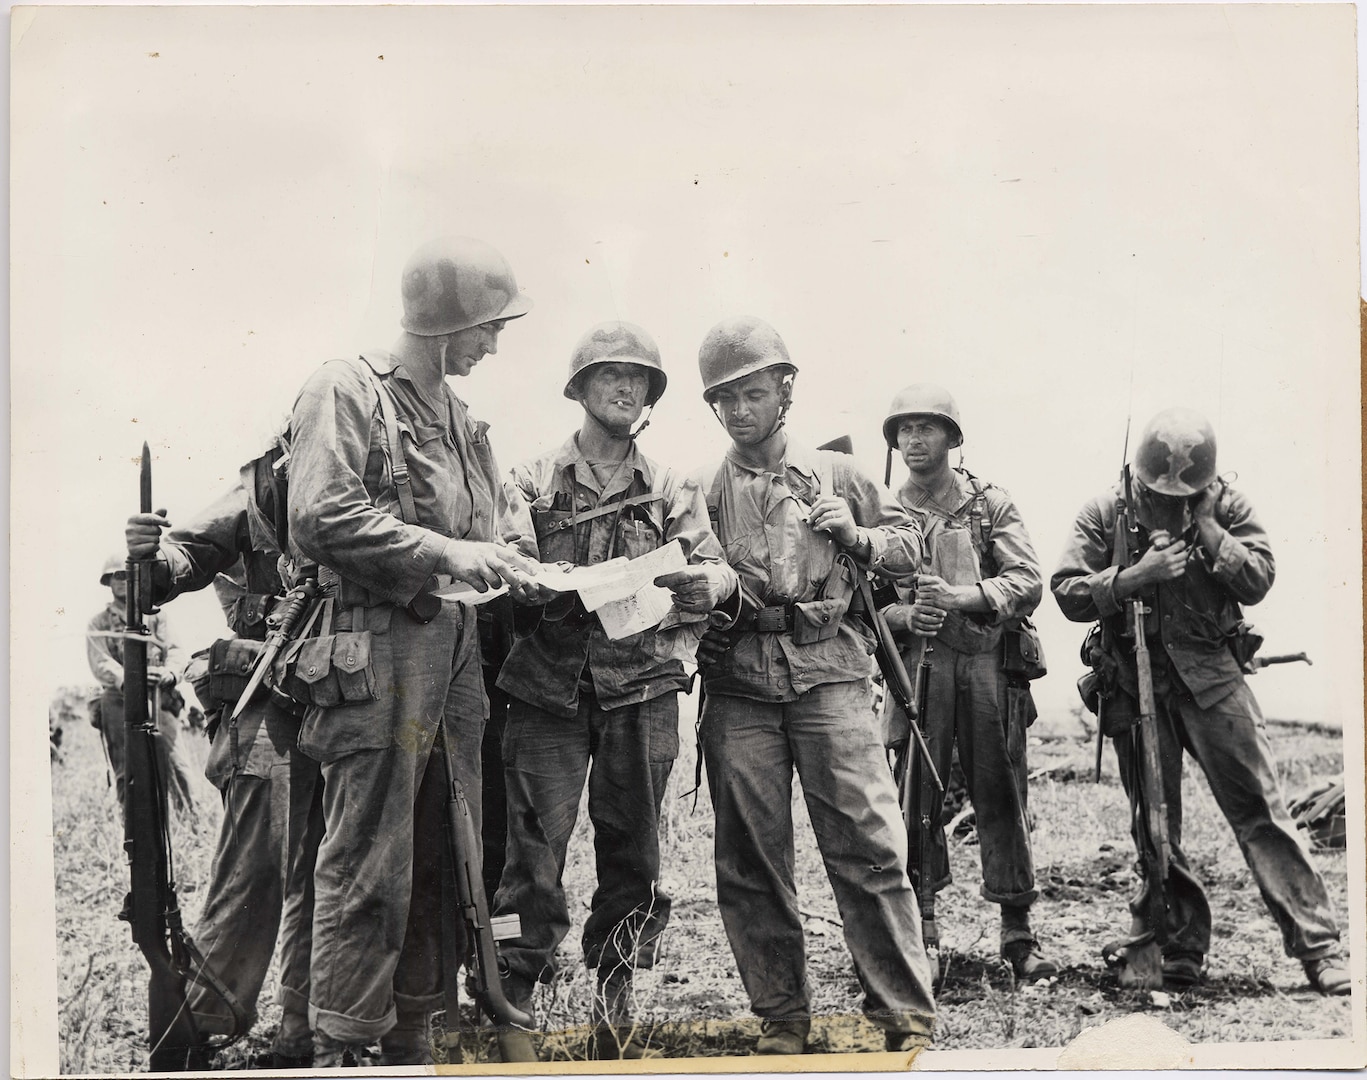 New York Army National Guard Lt. Col. William O'Brien, commander of the 1st Battalion, 105th Infantry Regiment, leads his unit in the relief of another outfit during the battle of Saipan, June 18, 1944. O'Brien would receive the Medal of Honor posthumously for his leadership and actions during the largest Japanese suicide charge of the Pacific Theater July 6-7, 1944.